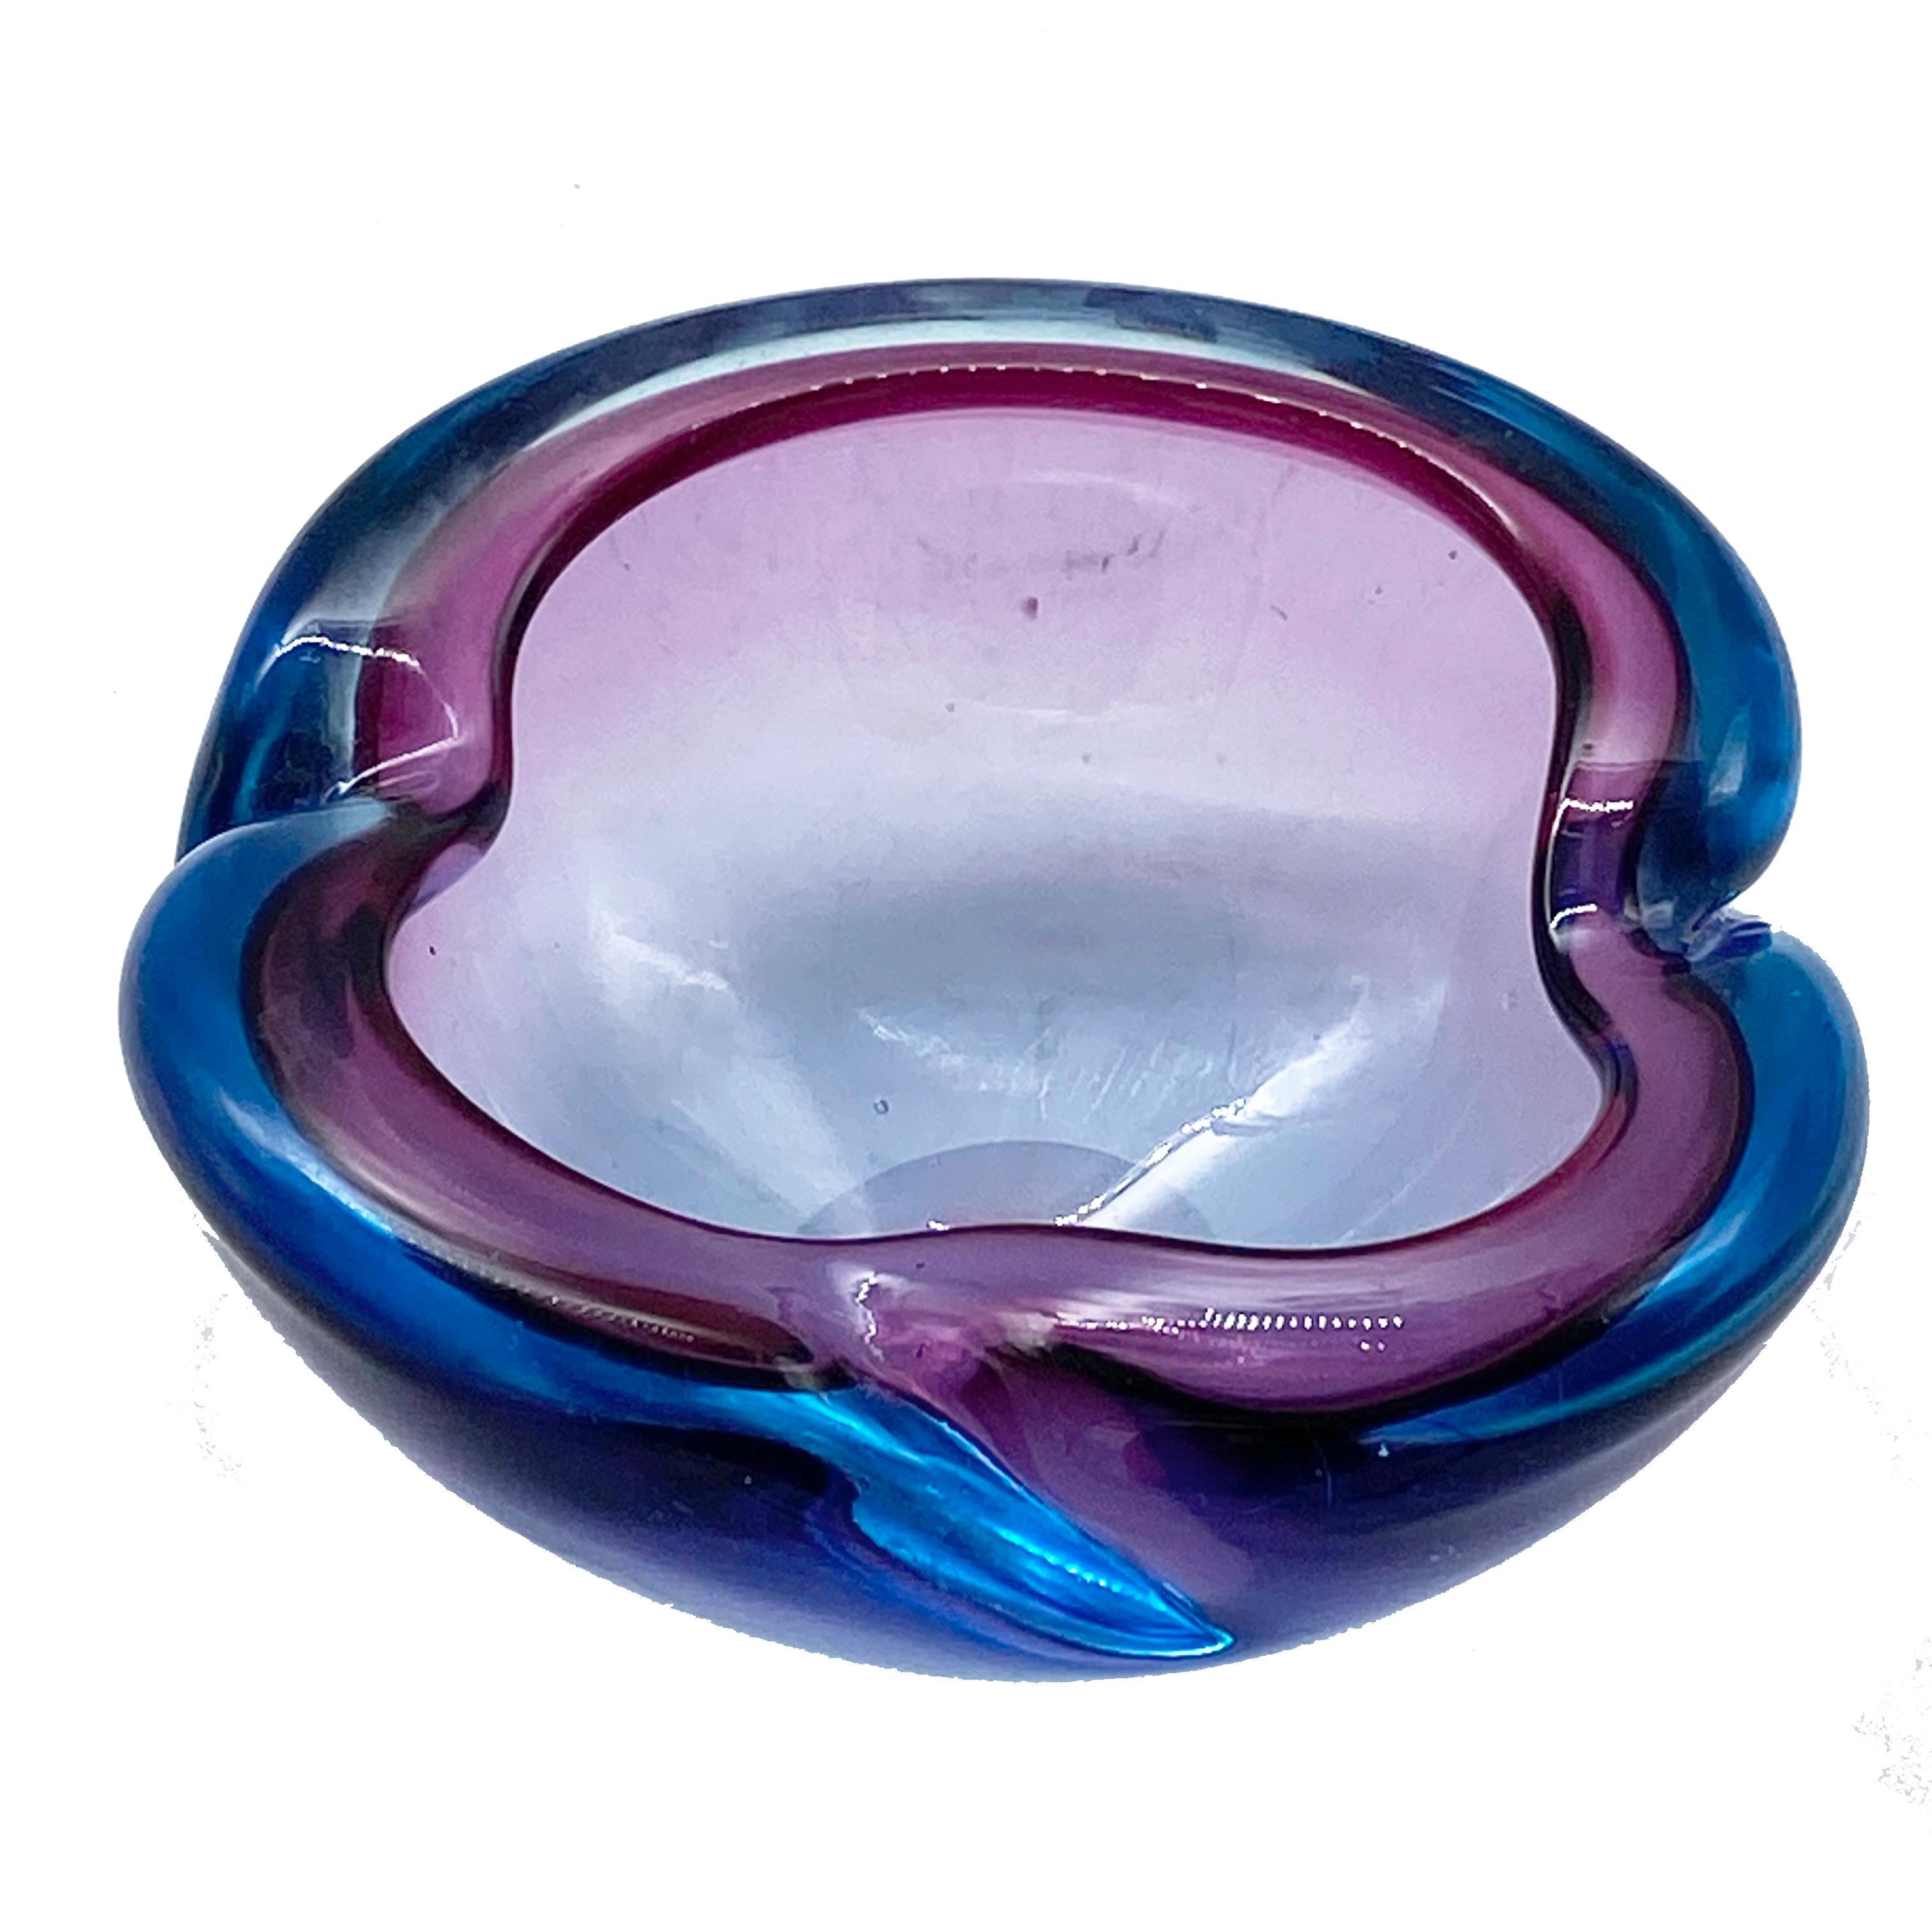 Mid-Century Modern Flavio Poli Murano Sommerso Turquoise and Pink Glass Bowl, Italy 1960s